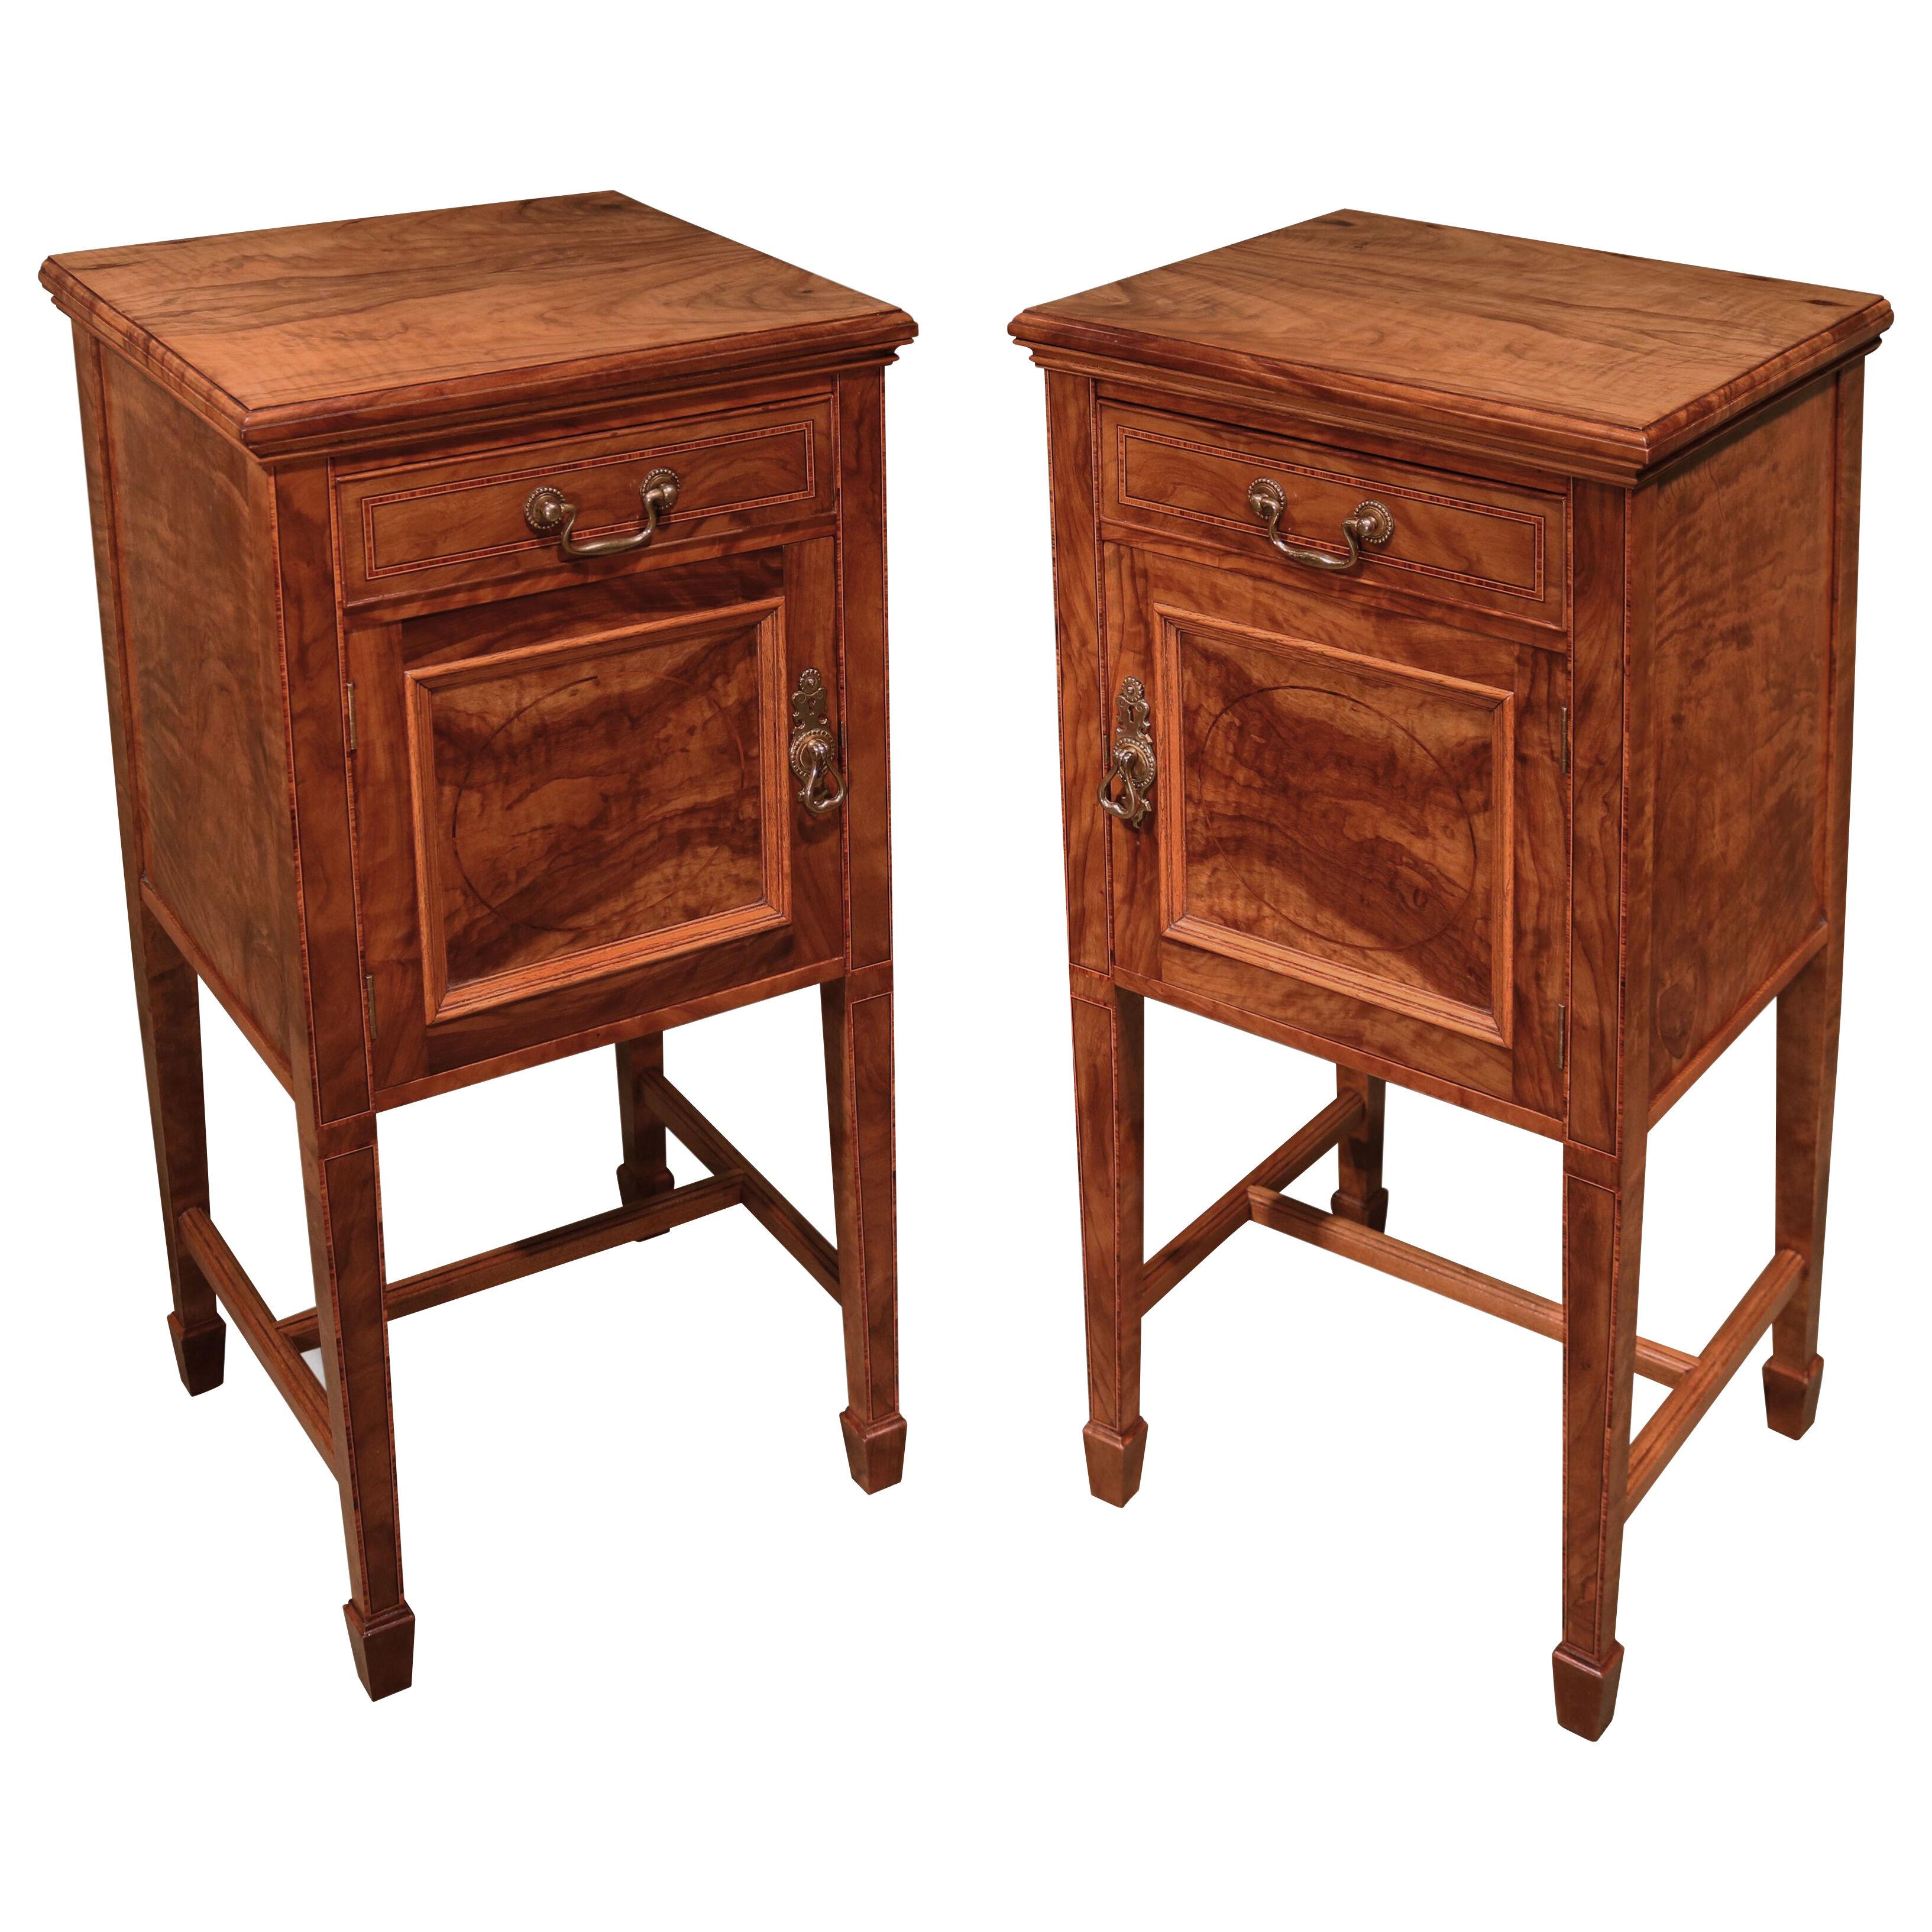 A Pair Of 19th Century Olivewood Bedside Cabinets